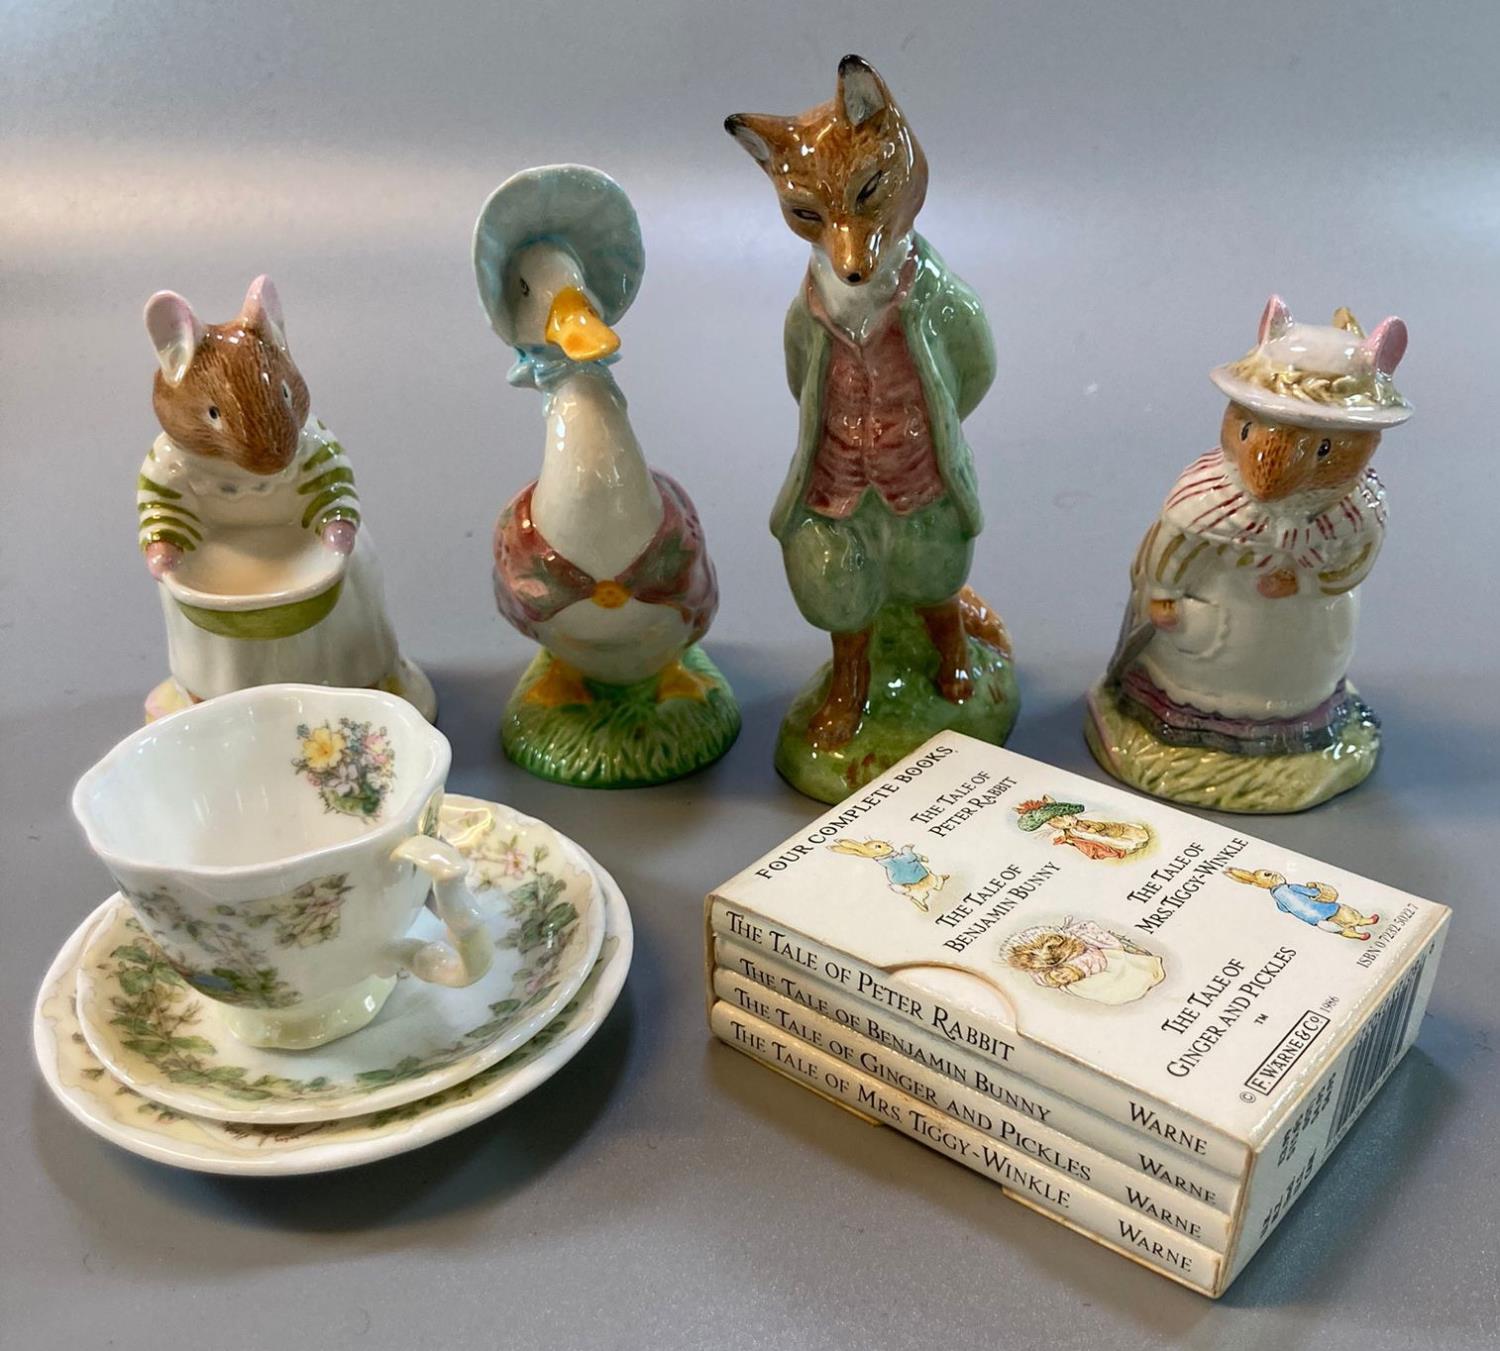 Two Royal Albert Beatrix Potter figurines, to include; Jemima Puddleduck and Foxy Whiskered